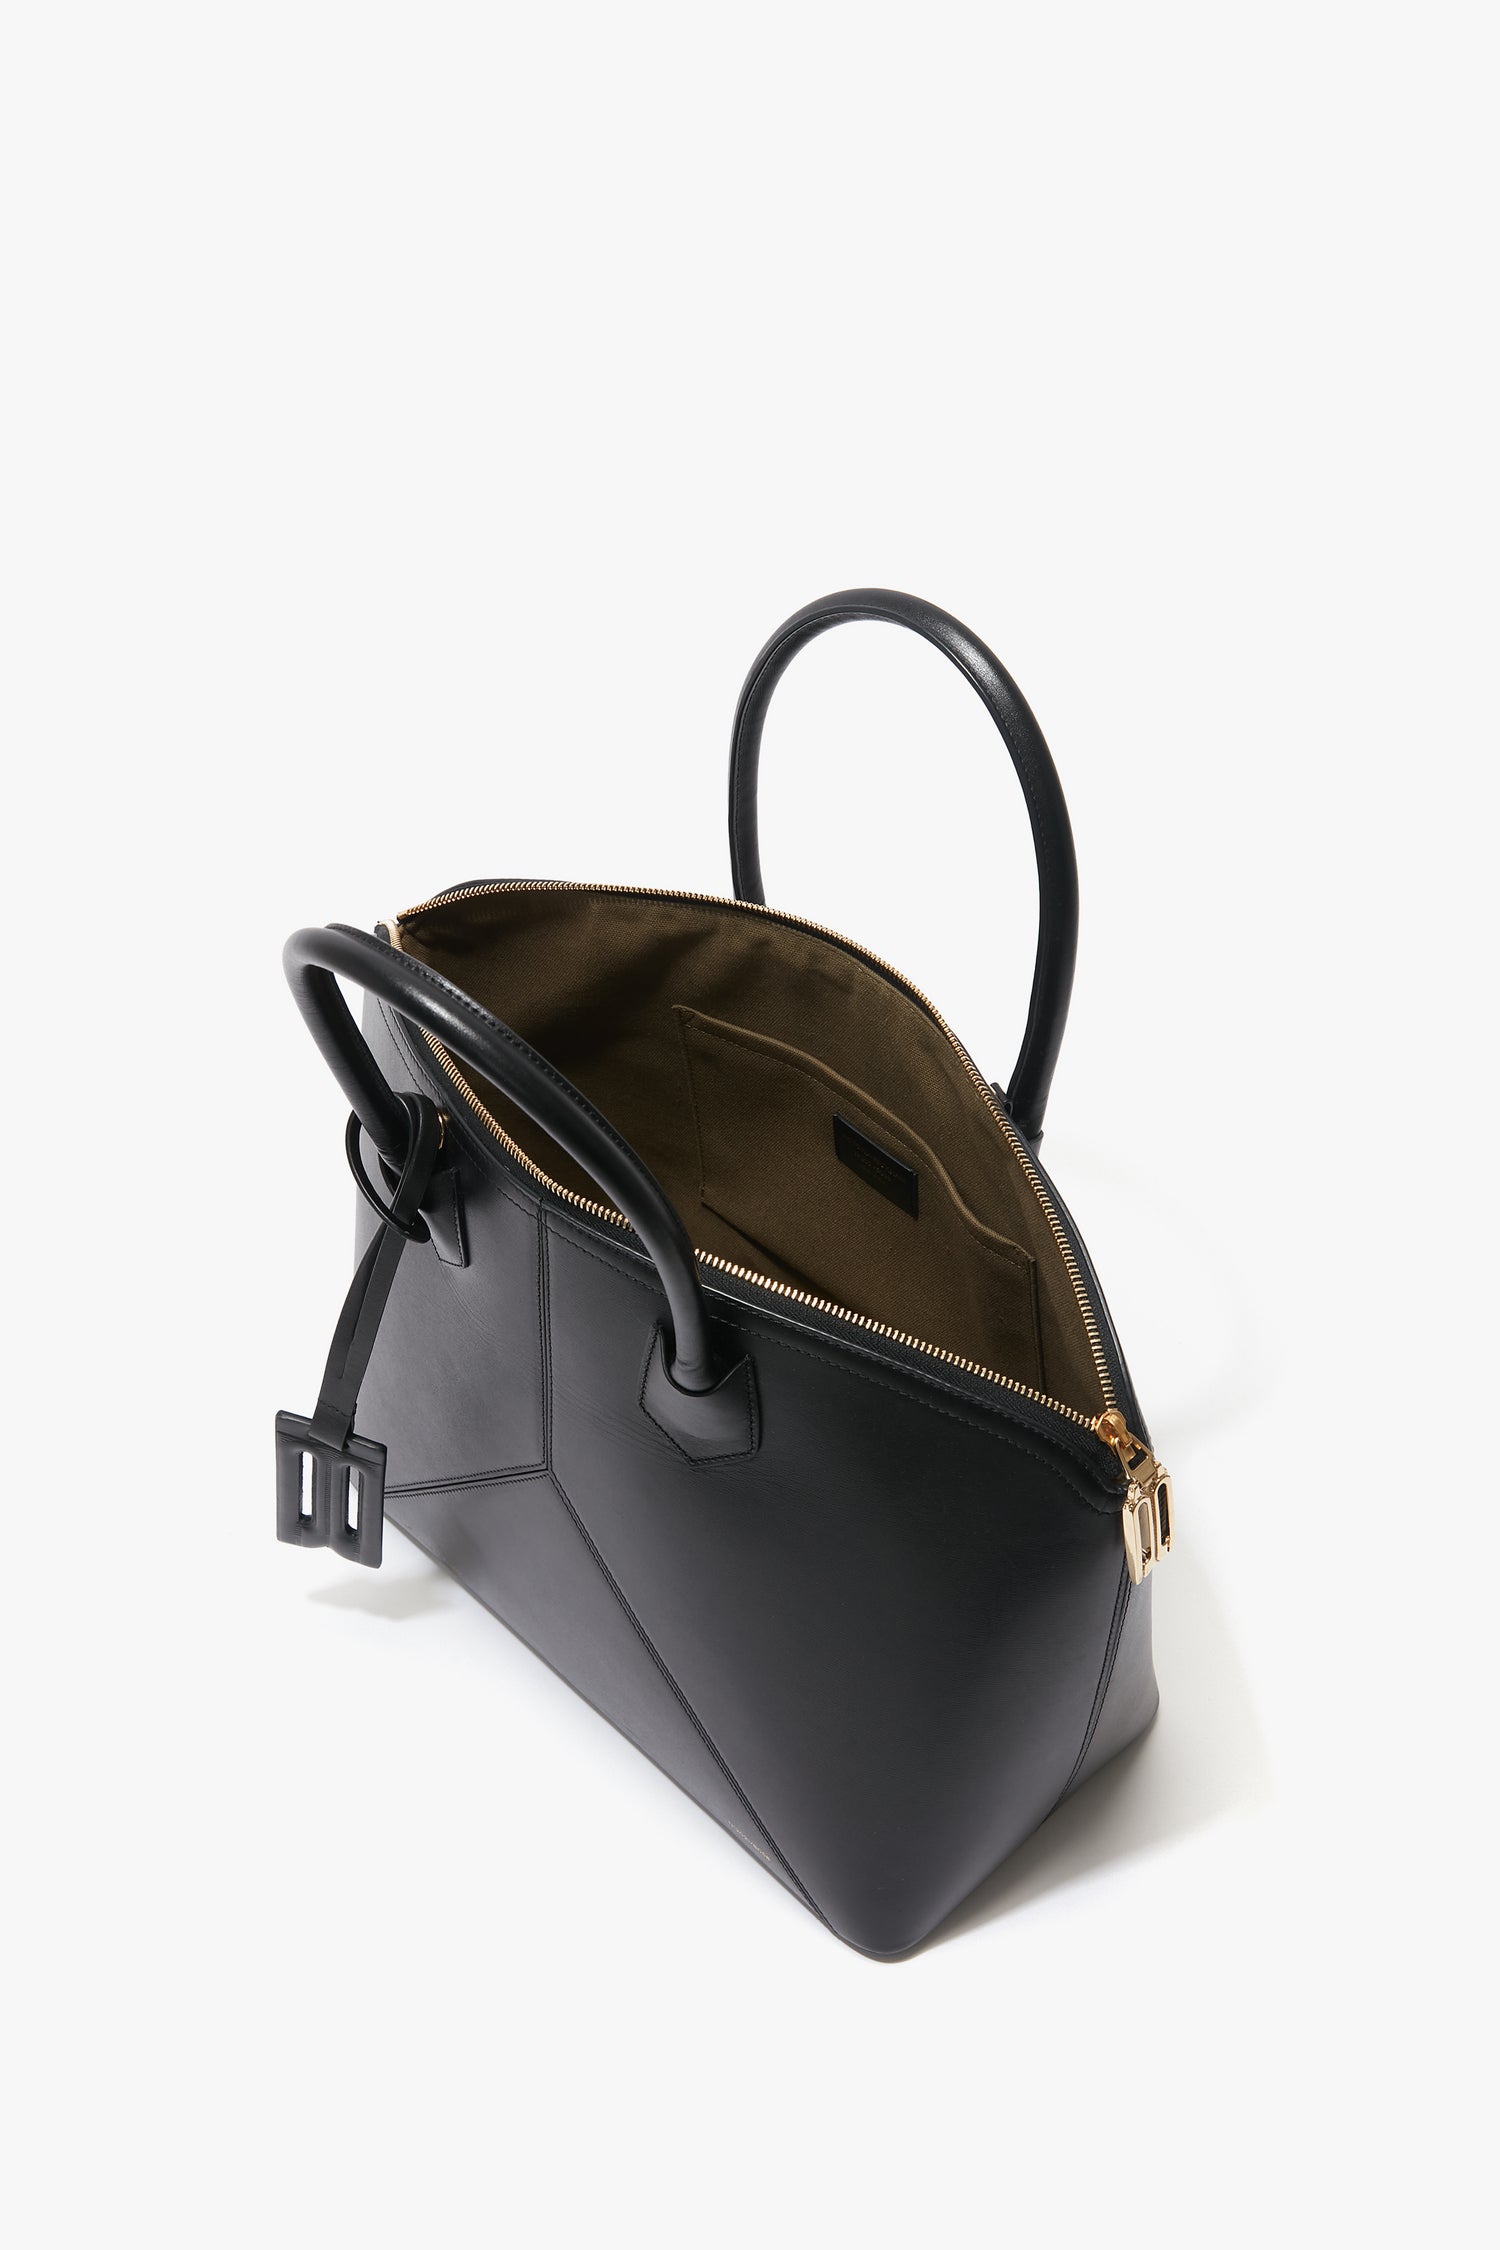 The Victoria Beckham Victoria Bag In Black Leather is a black leather handbag with gold hardware, unzipped to reveal a brown interior. Designed with versatile hold-all functionality, it boasts two black handles, leather panels, and a small attached belt.